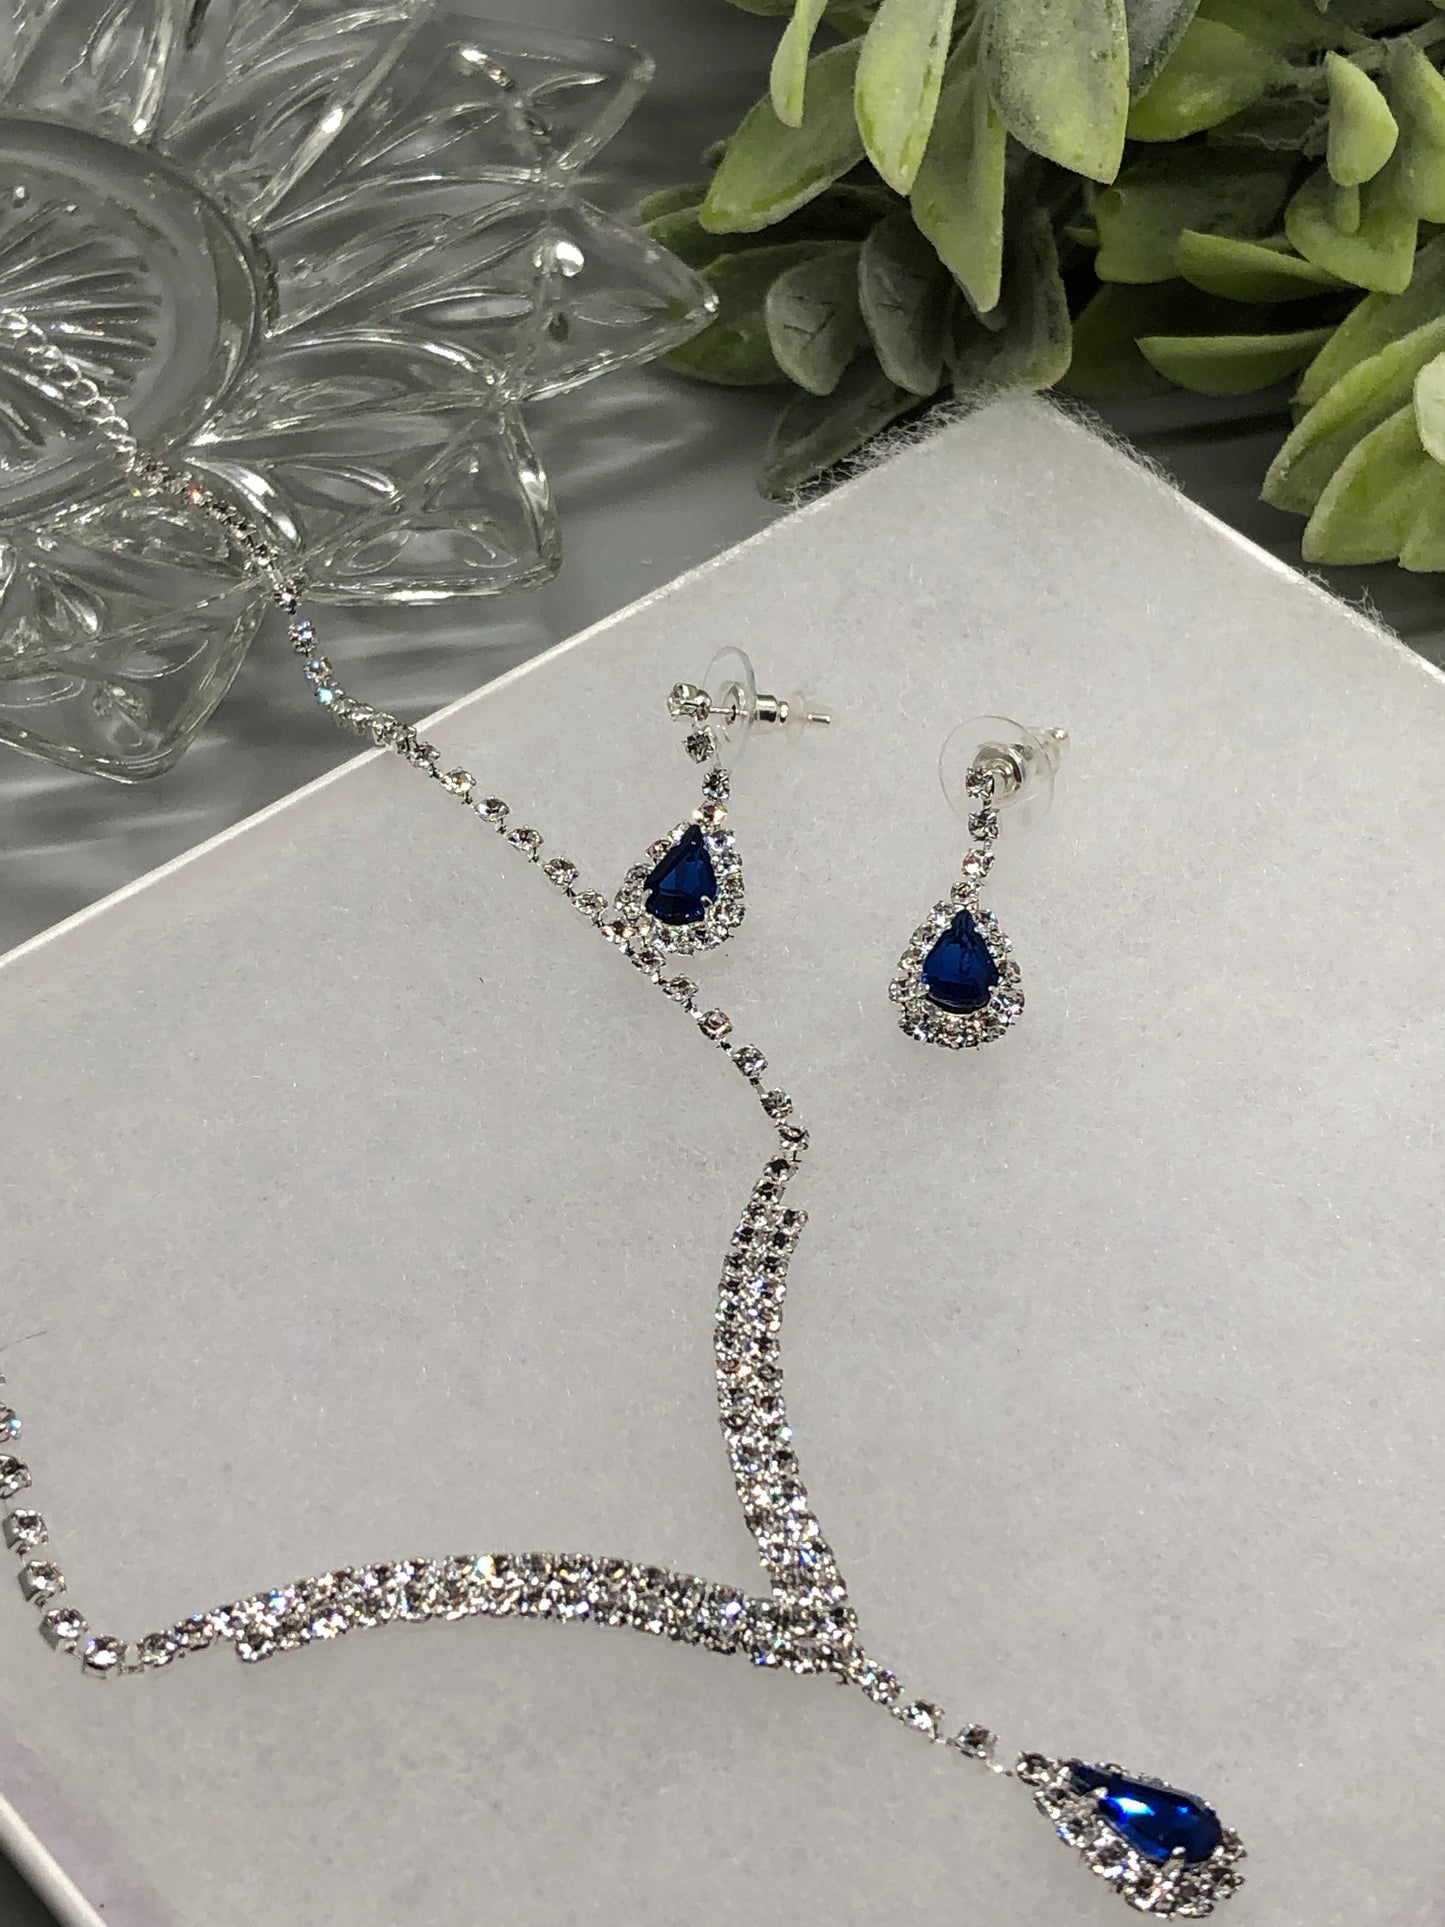 Navy Blue Crystal Rhinestone Bridal Necklace Earrings Sets Wedding Formal Shower Party Event Accessories #007